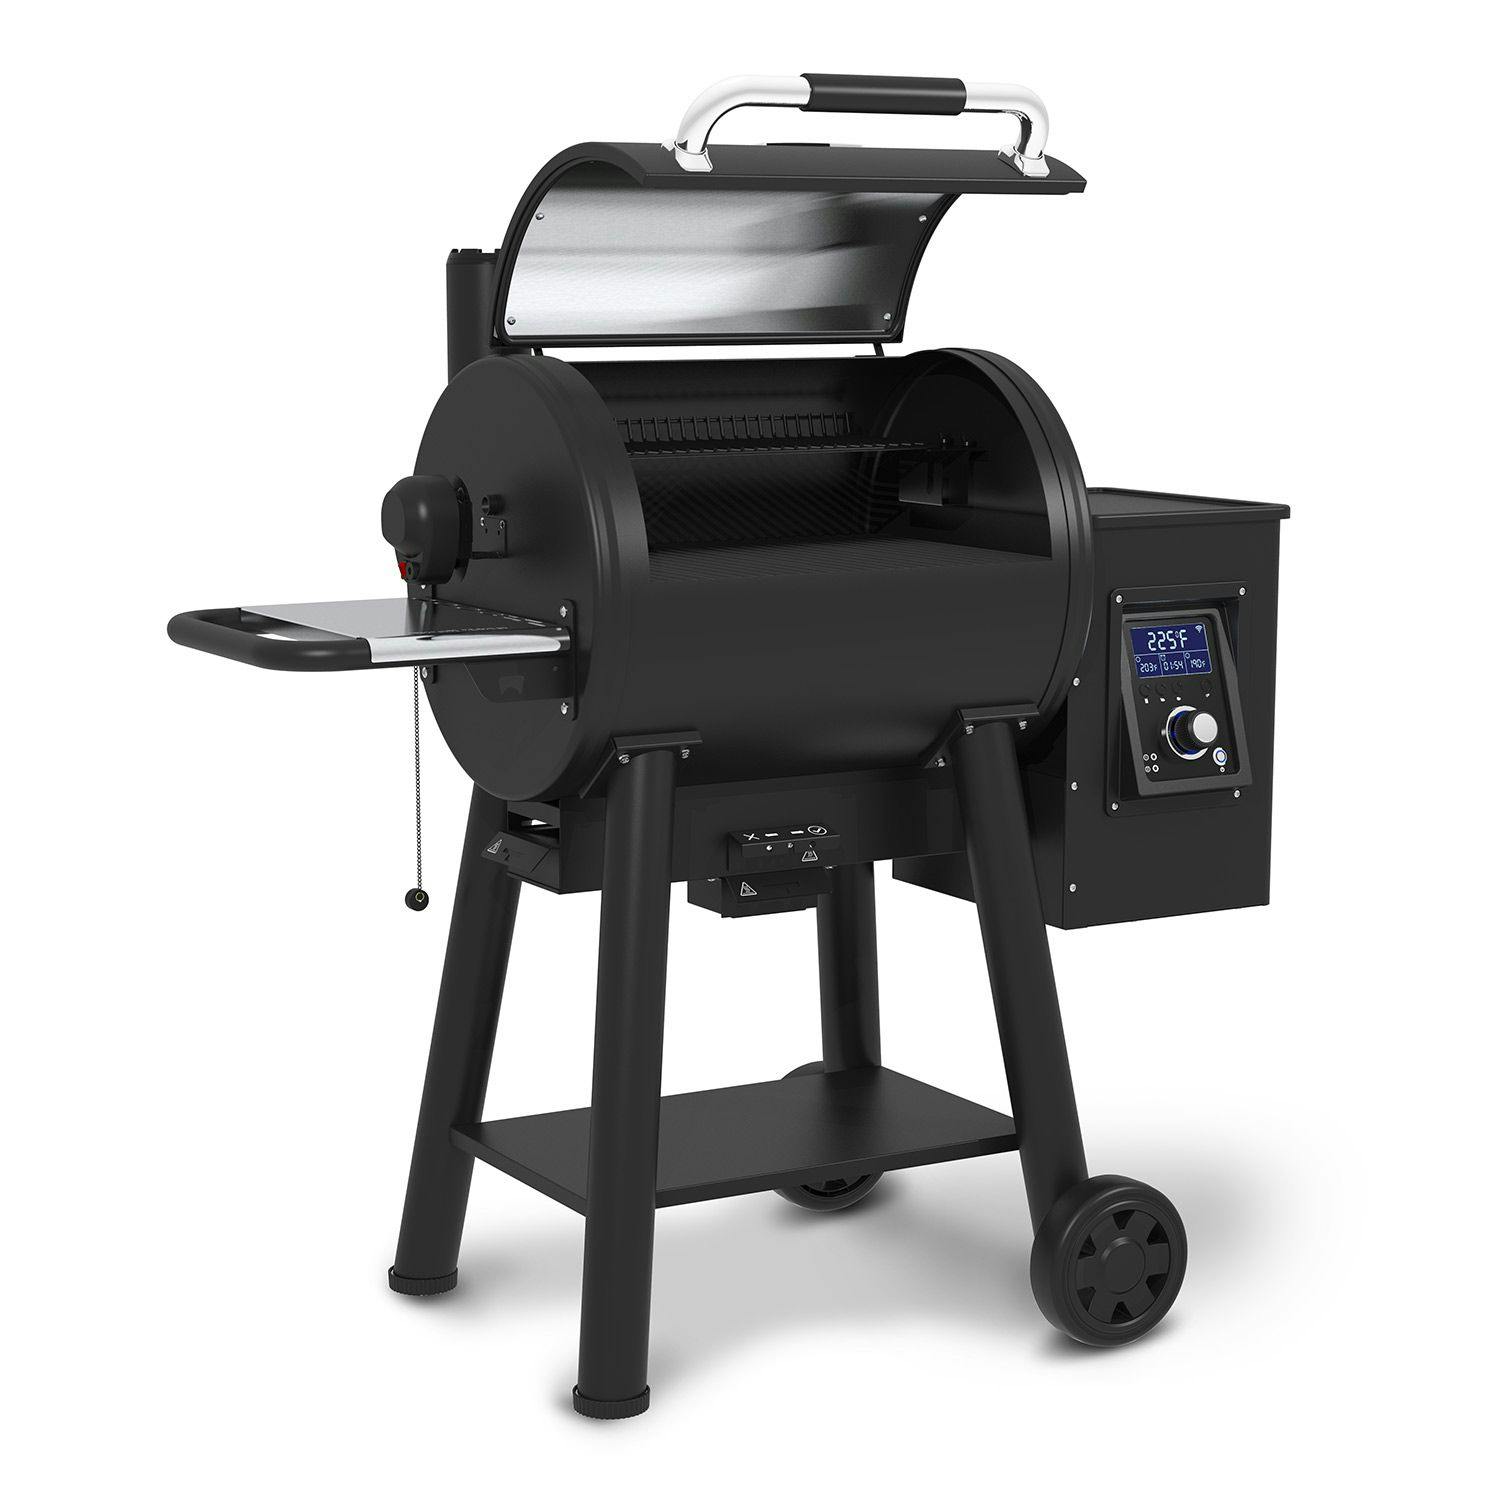 Broil King Regal Wi-Fi & Bluetooth Controlled Pellet Grill